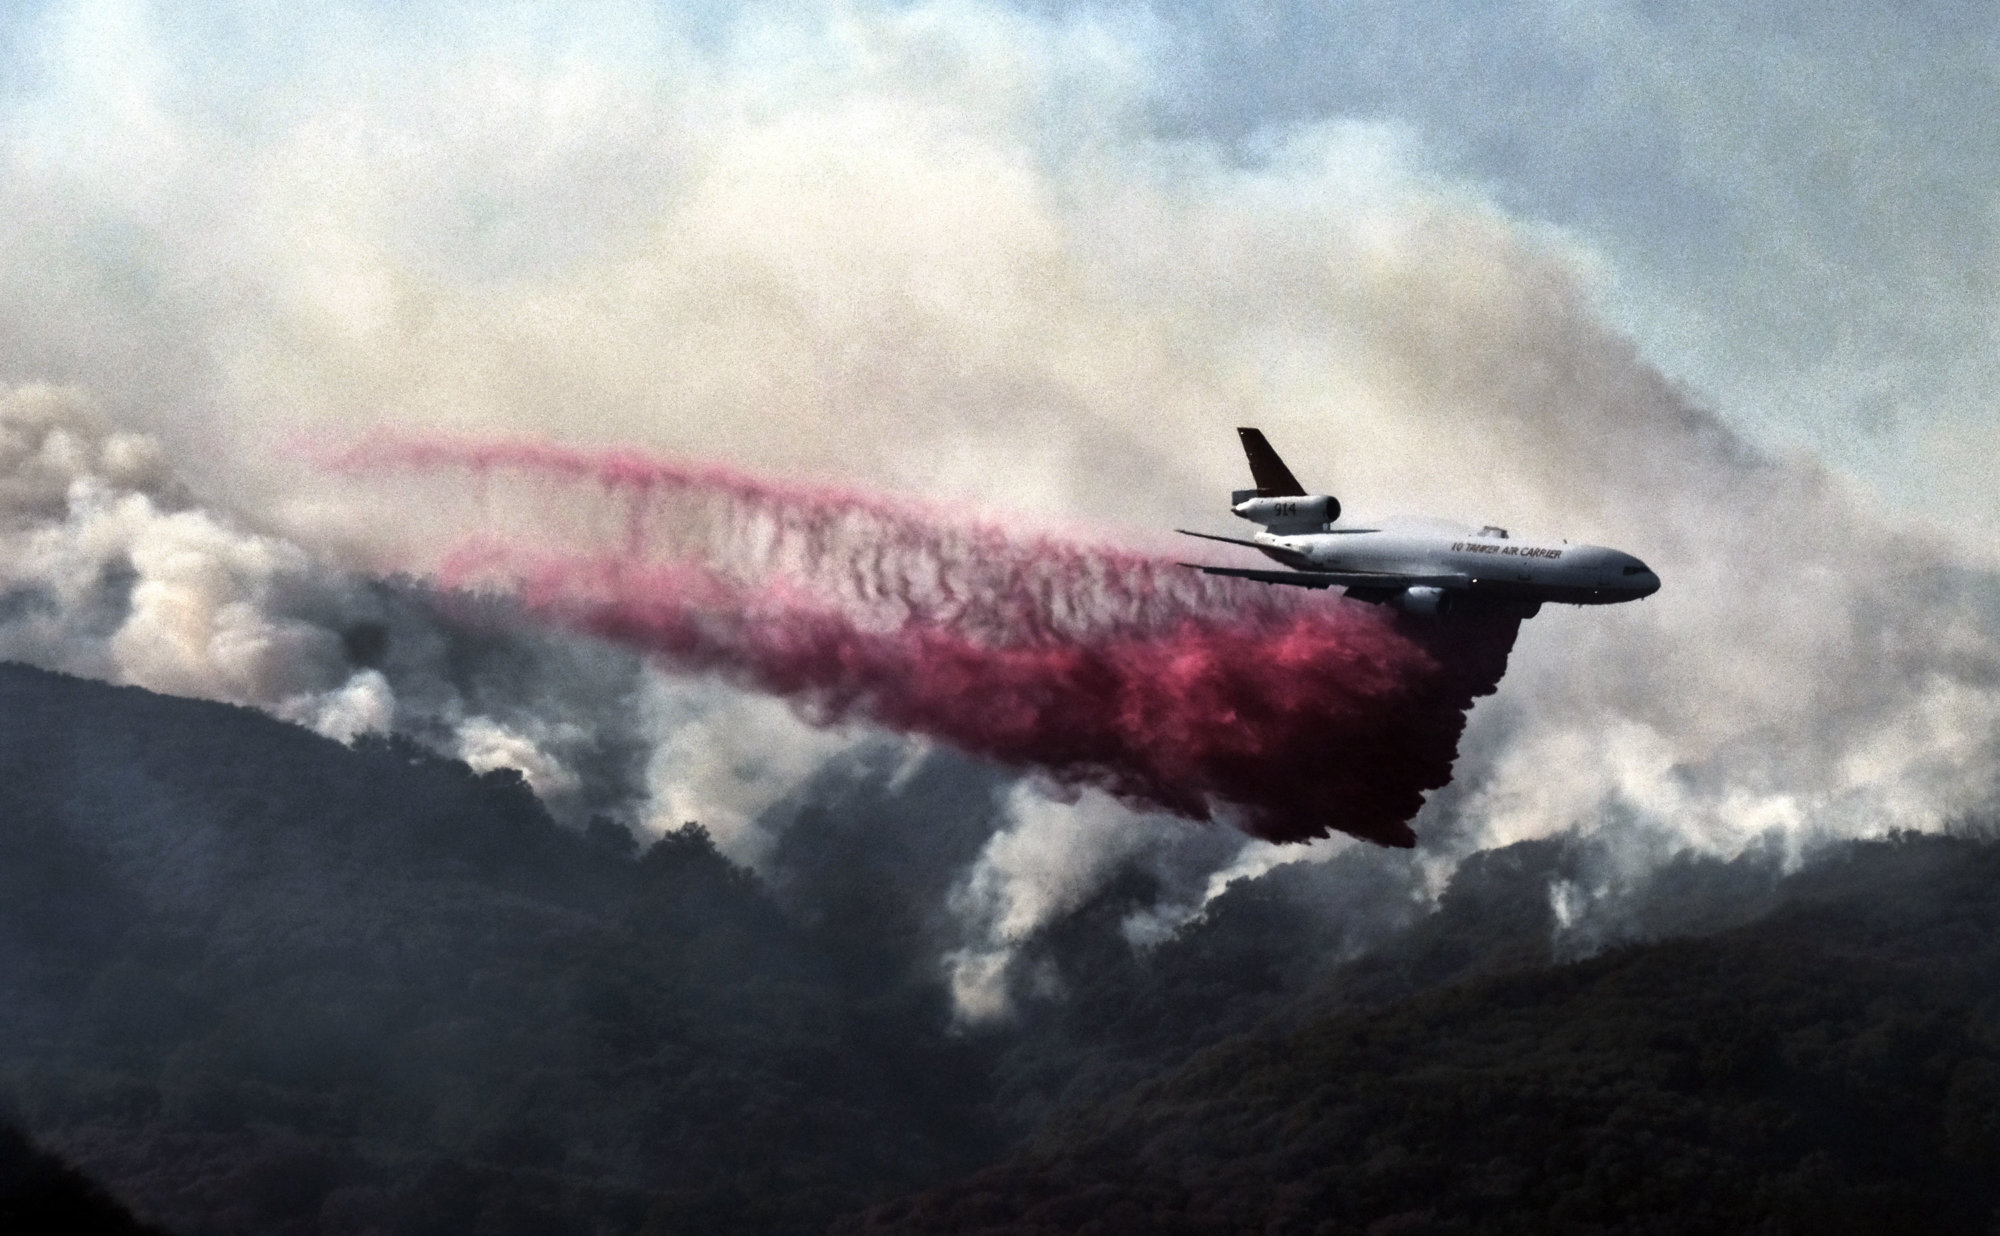 A firefighting DC-10 makes a fire retardant drop over a wildfire in the mountains near Malibu Canyon Road in Malibu, Calif. on Sunday, Nov. 11, 2018. Strong Santa Ana winds have returned to Southern California, fanning a huge wildfire that has scorched a string of communities west of Los Angeles. A one-day lull in the dry, northeasterly winds ended Sunday morning and authorities warn that the gusts will continue through Tuesday. (AP Photo/Richard Vogel)